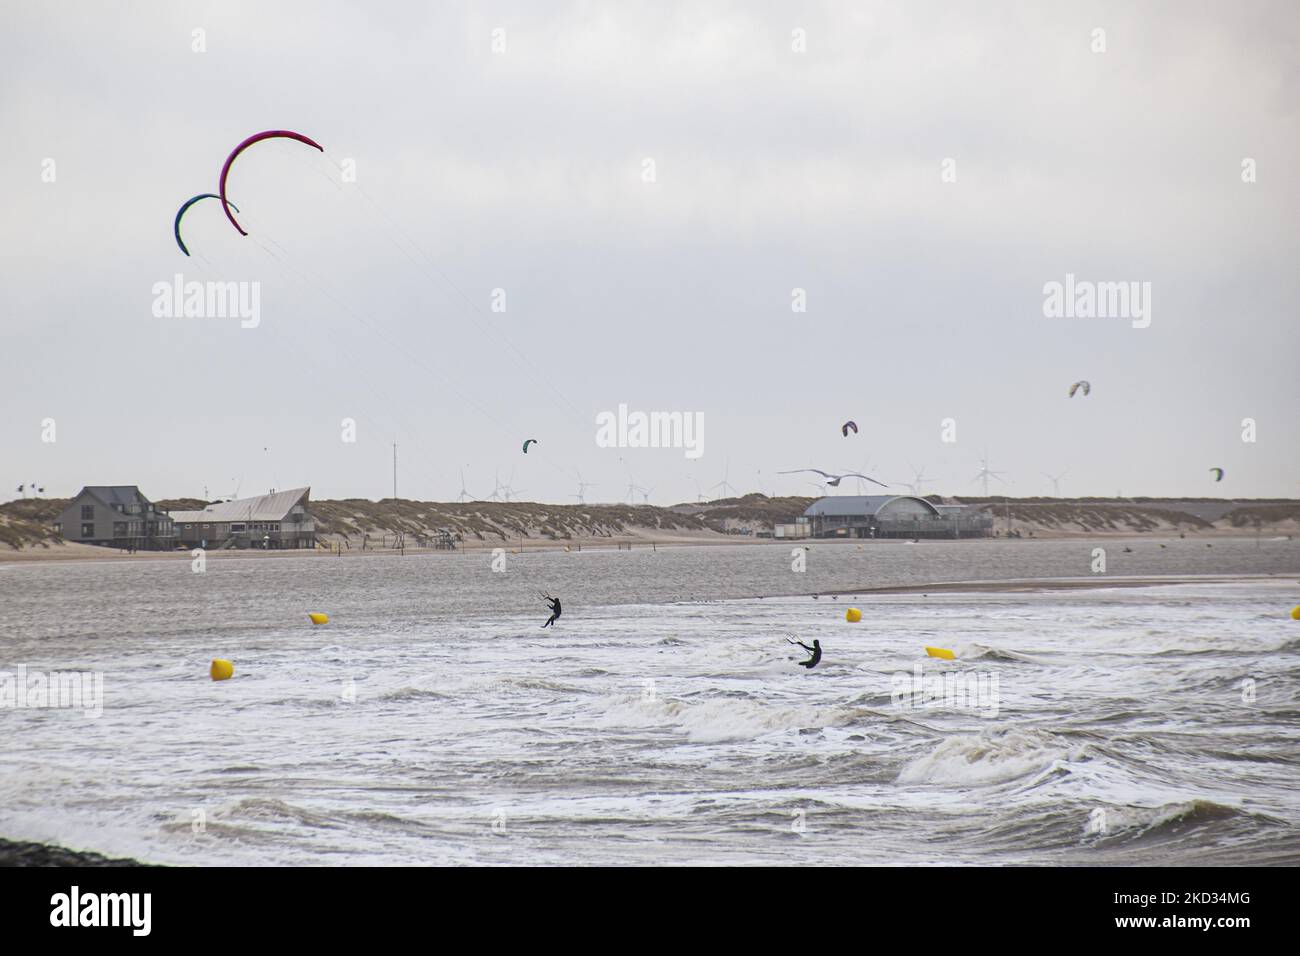 People do kitesurf over the waves and other watersports as storm Eunice hits with strong winds the Dutch shore. Storm Eunice hit the Netherlands after storm Dudley with wind gust speed exceeding 120km/h, resulting in damages in buildings, cars and killing people from trees falling. The government issued a red warning and 112 alarm emergency notifications on the phones before the storm hit.The Brouwersdam is a six kilometer long dam that connects the provinces of South Holland and Zeeland. It is part of the Delta Works and was opened to the public in 1971. Brouwersdam, Ouddorp, The Netherlands  Stock Photo